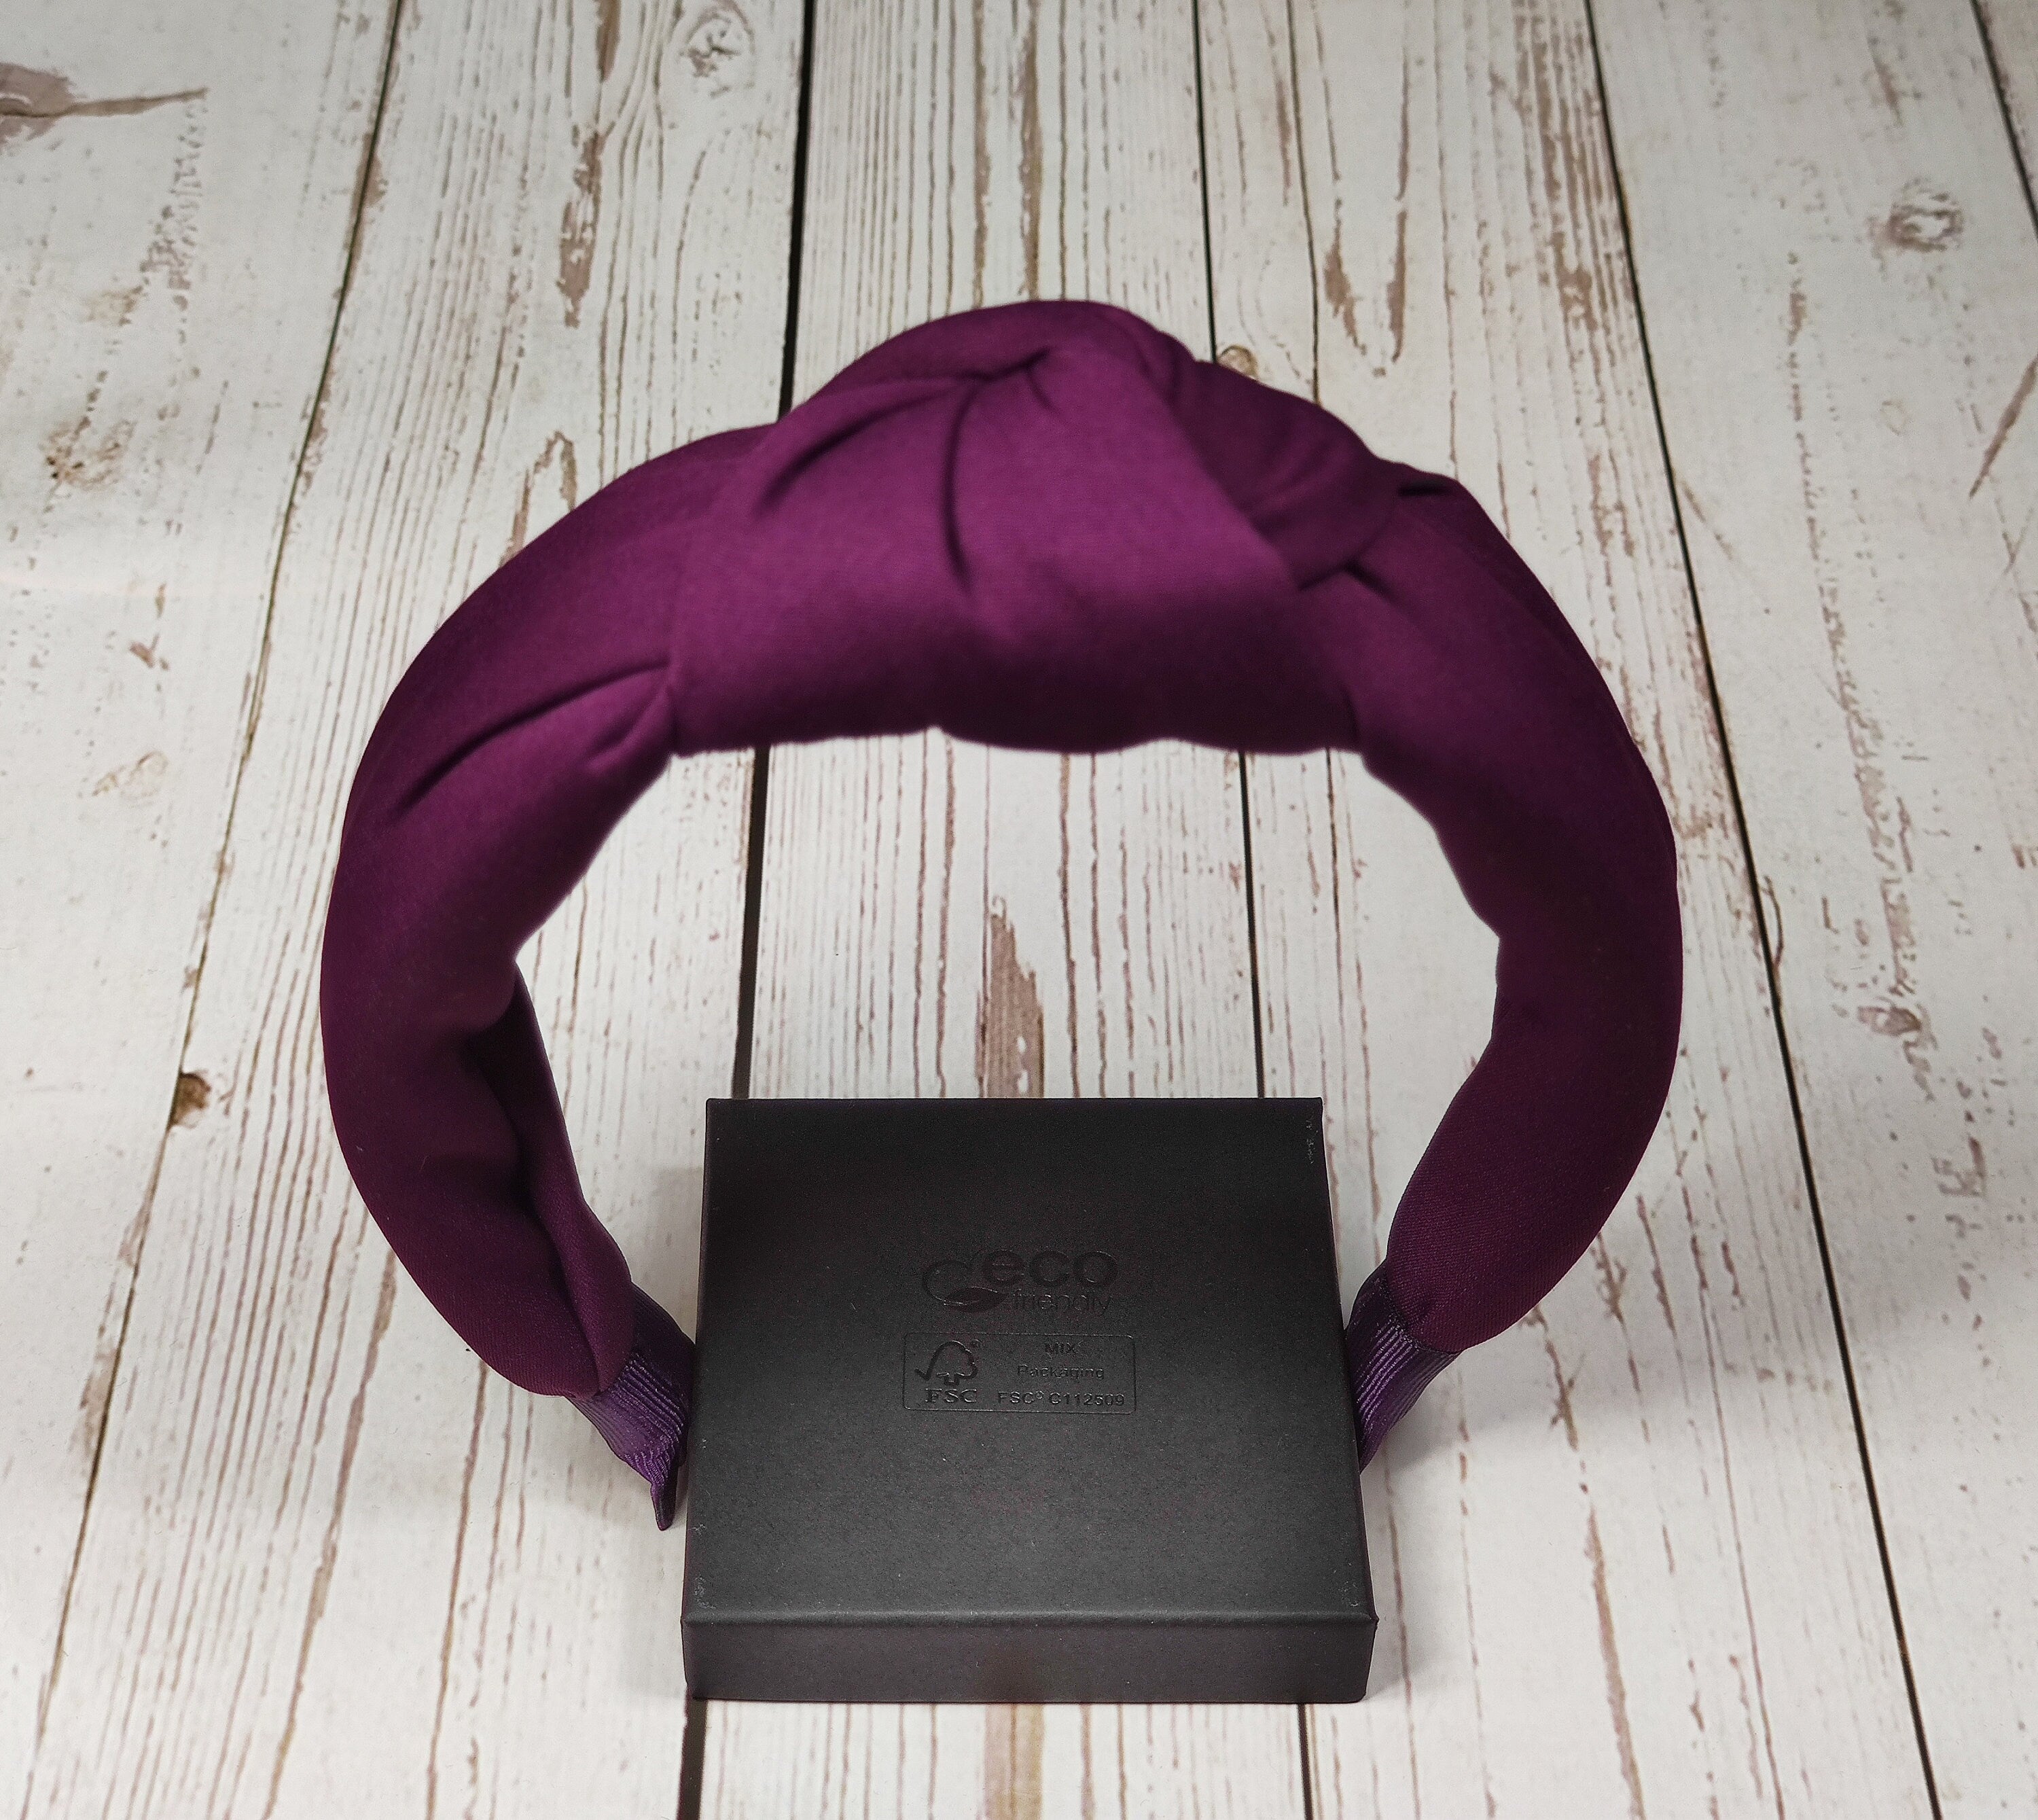 Stay cool and comfortable throughout the summer days with this maroon bandana headband. This headband is made from breathable and lightweight fabric, so you can wear it all day long without feeling